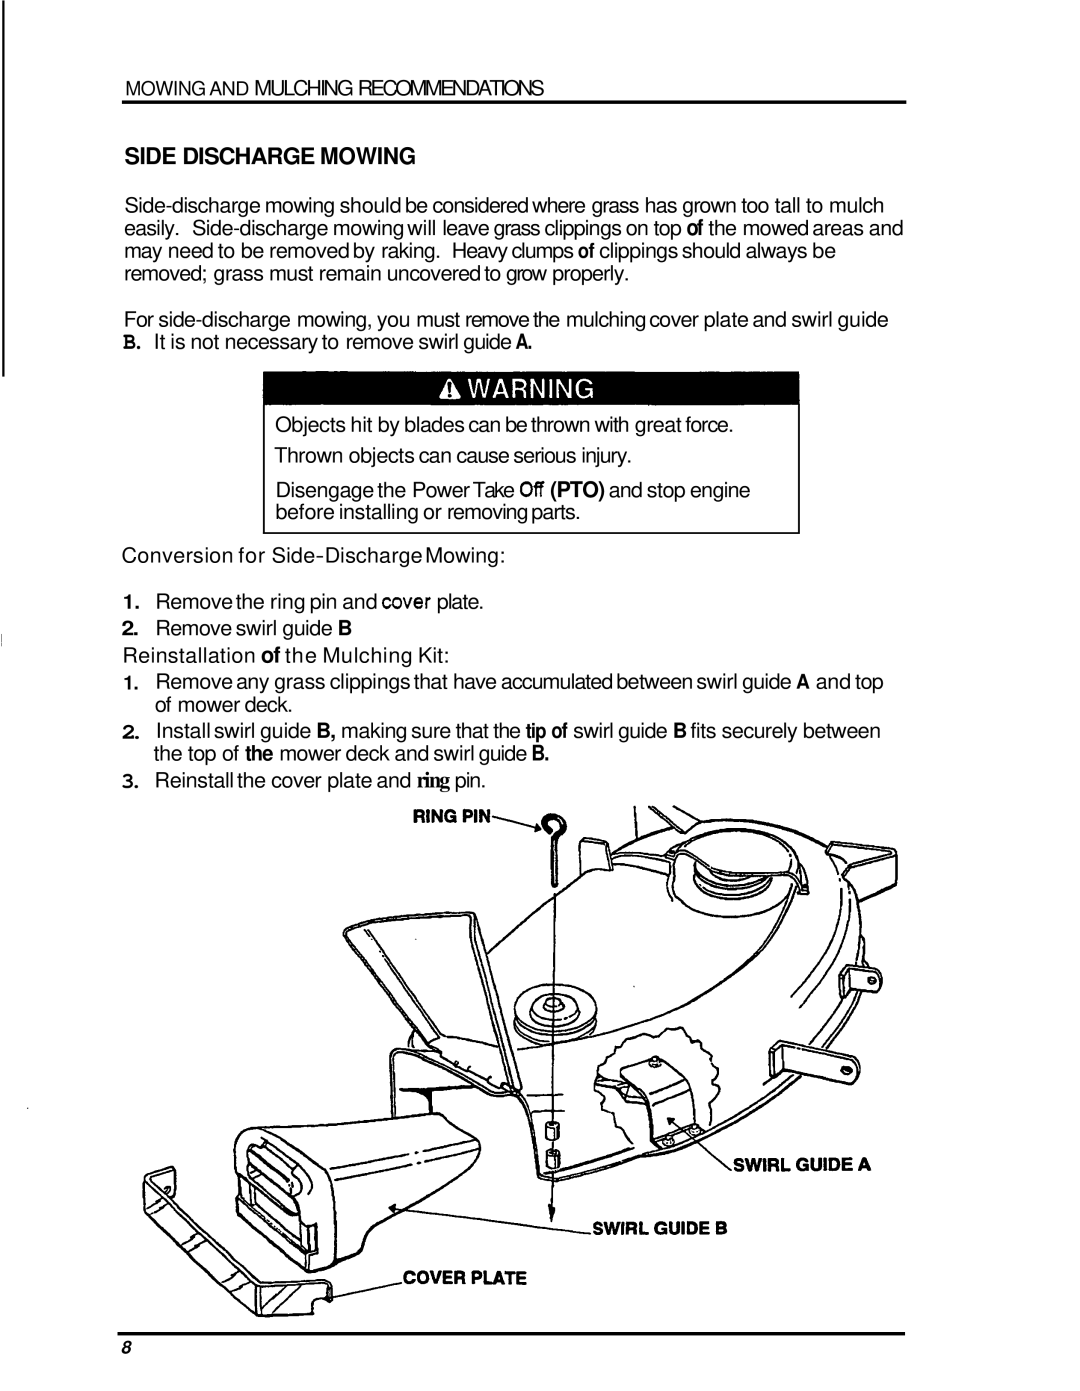 Honda Power Equipment H2000 manual Side Discharge Mowing 